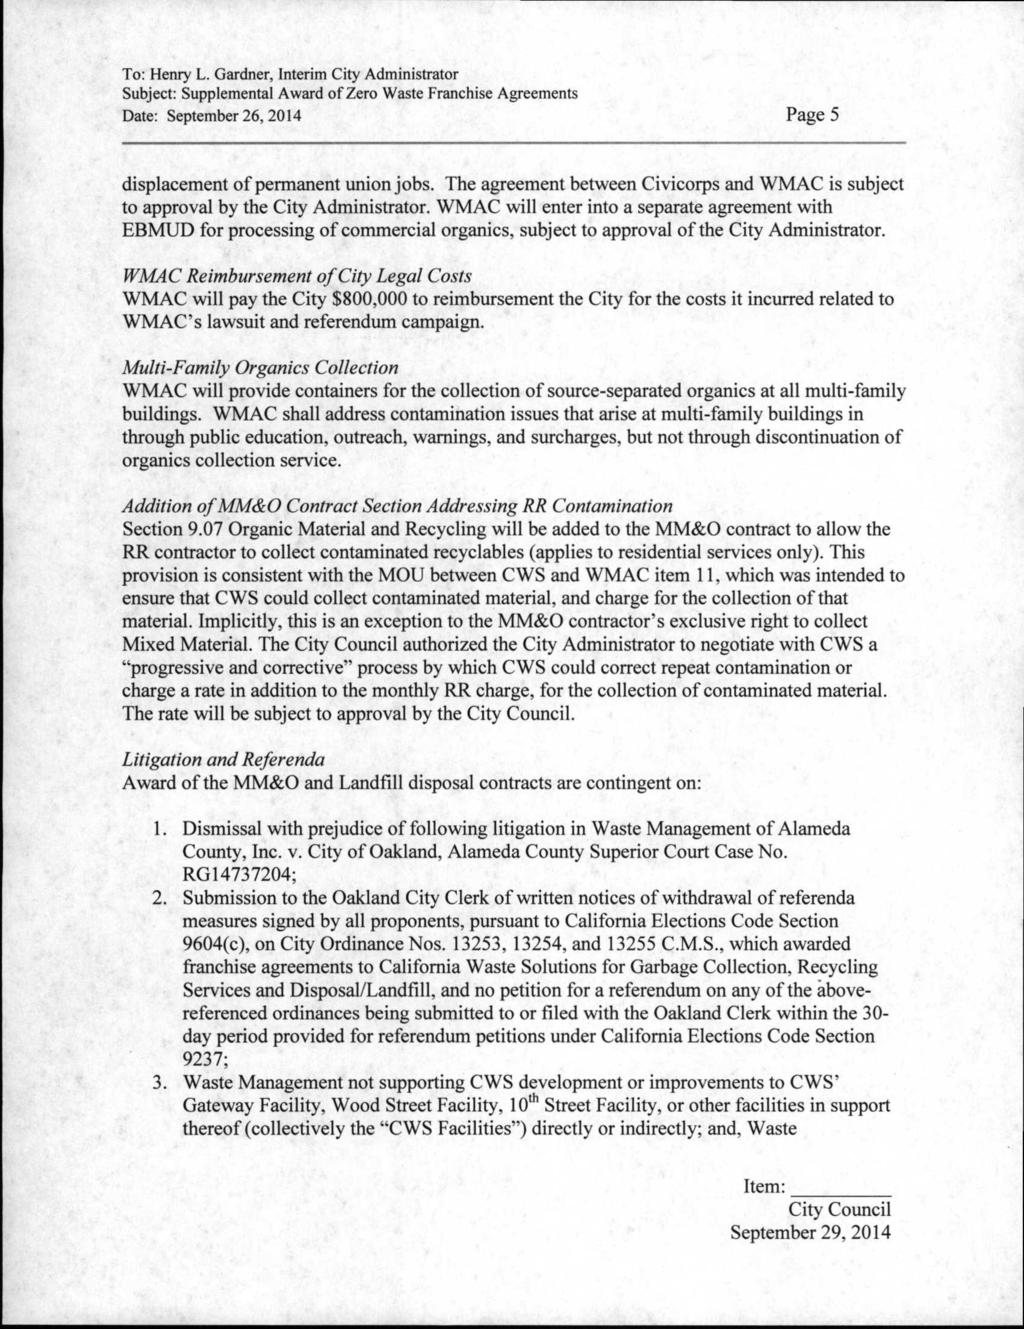 To: Henry L. Gardner, Interim City Administrator Subject: Supplemental Award of Zero Waste Franchise Agreements, < Date: September 26,2014 " Page 5 displacement of permanent union jobs.